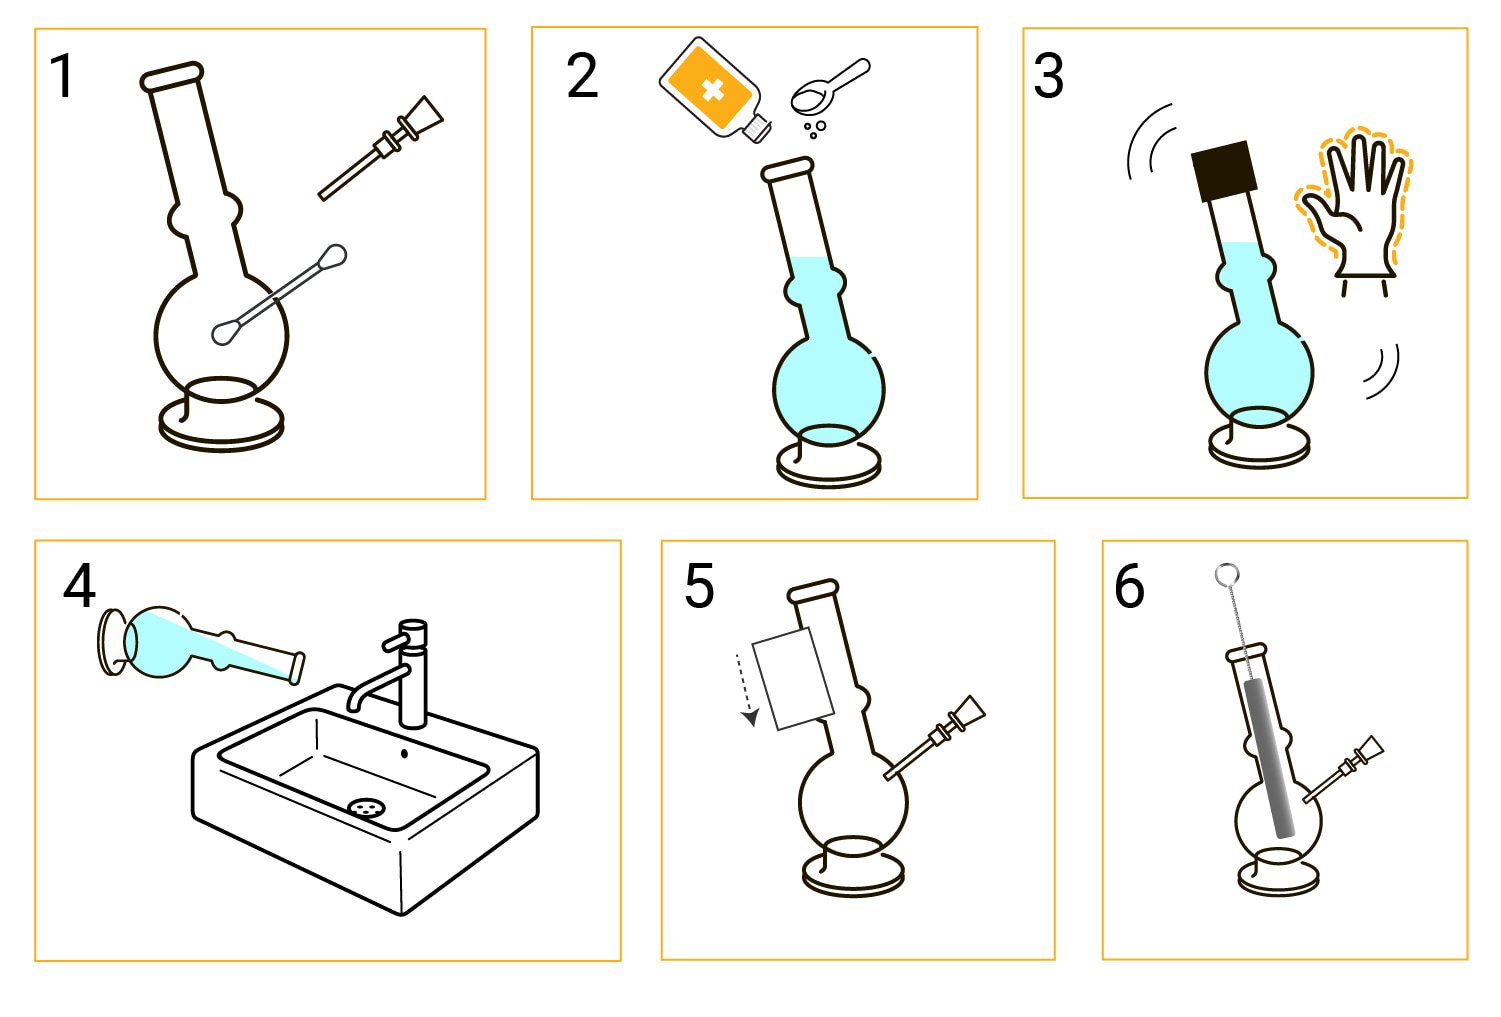 How To Clean Different Types Of Bongs And Pipes - RQS Blog